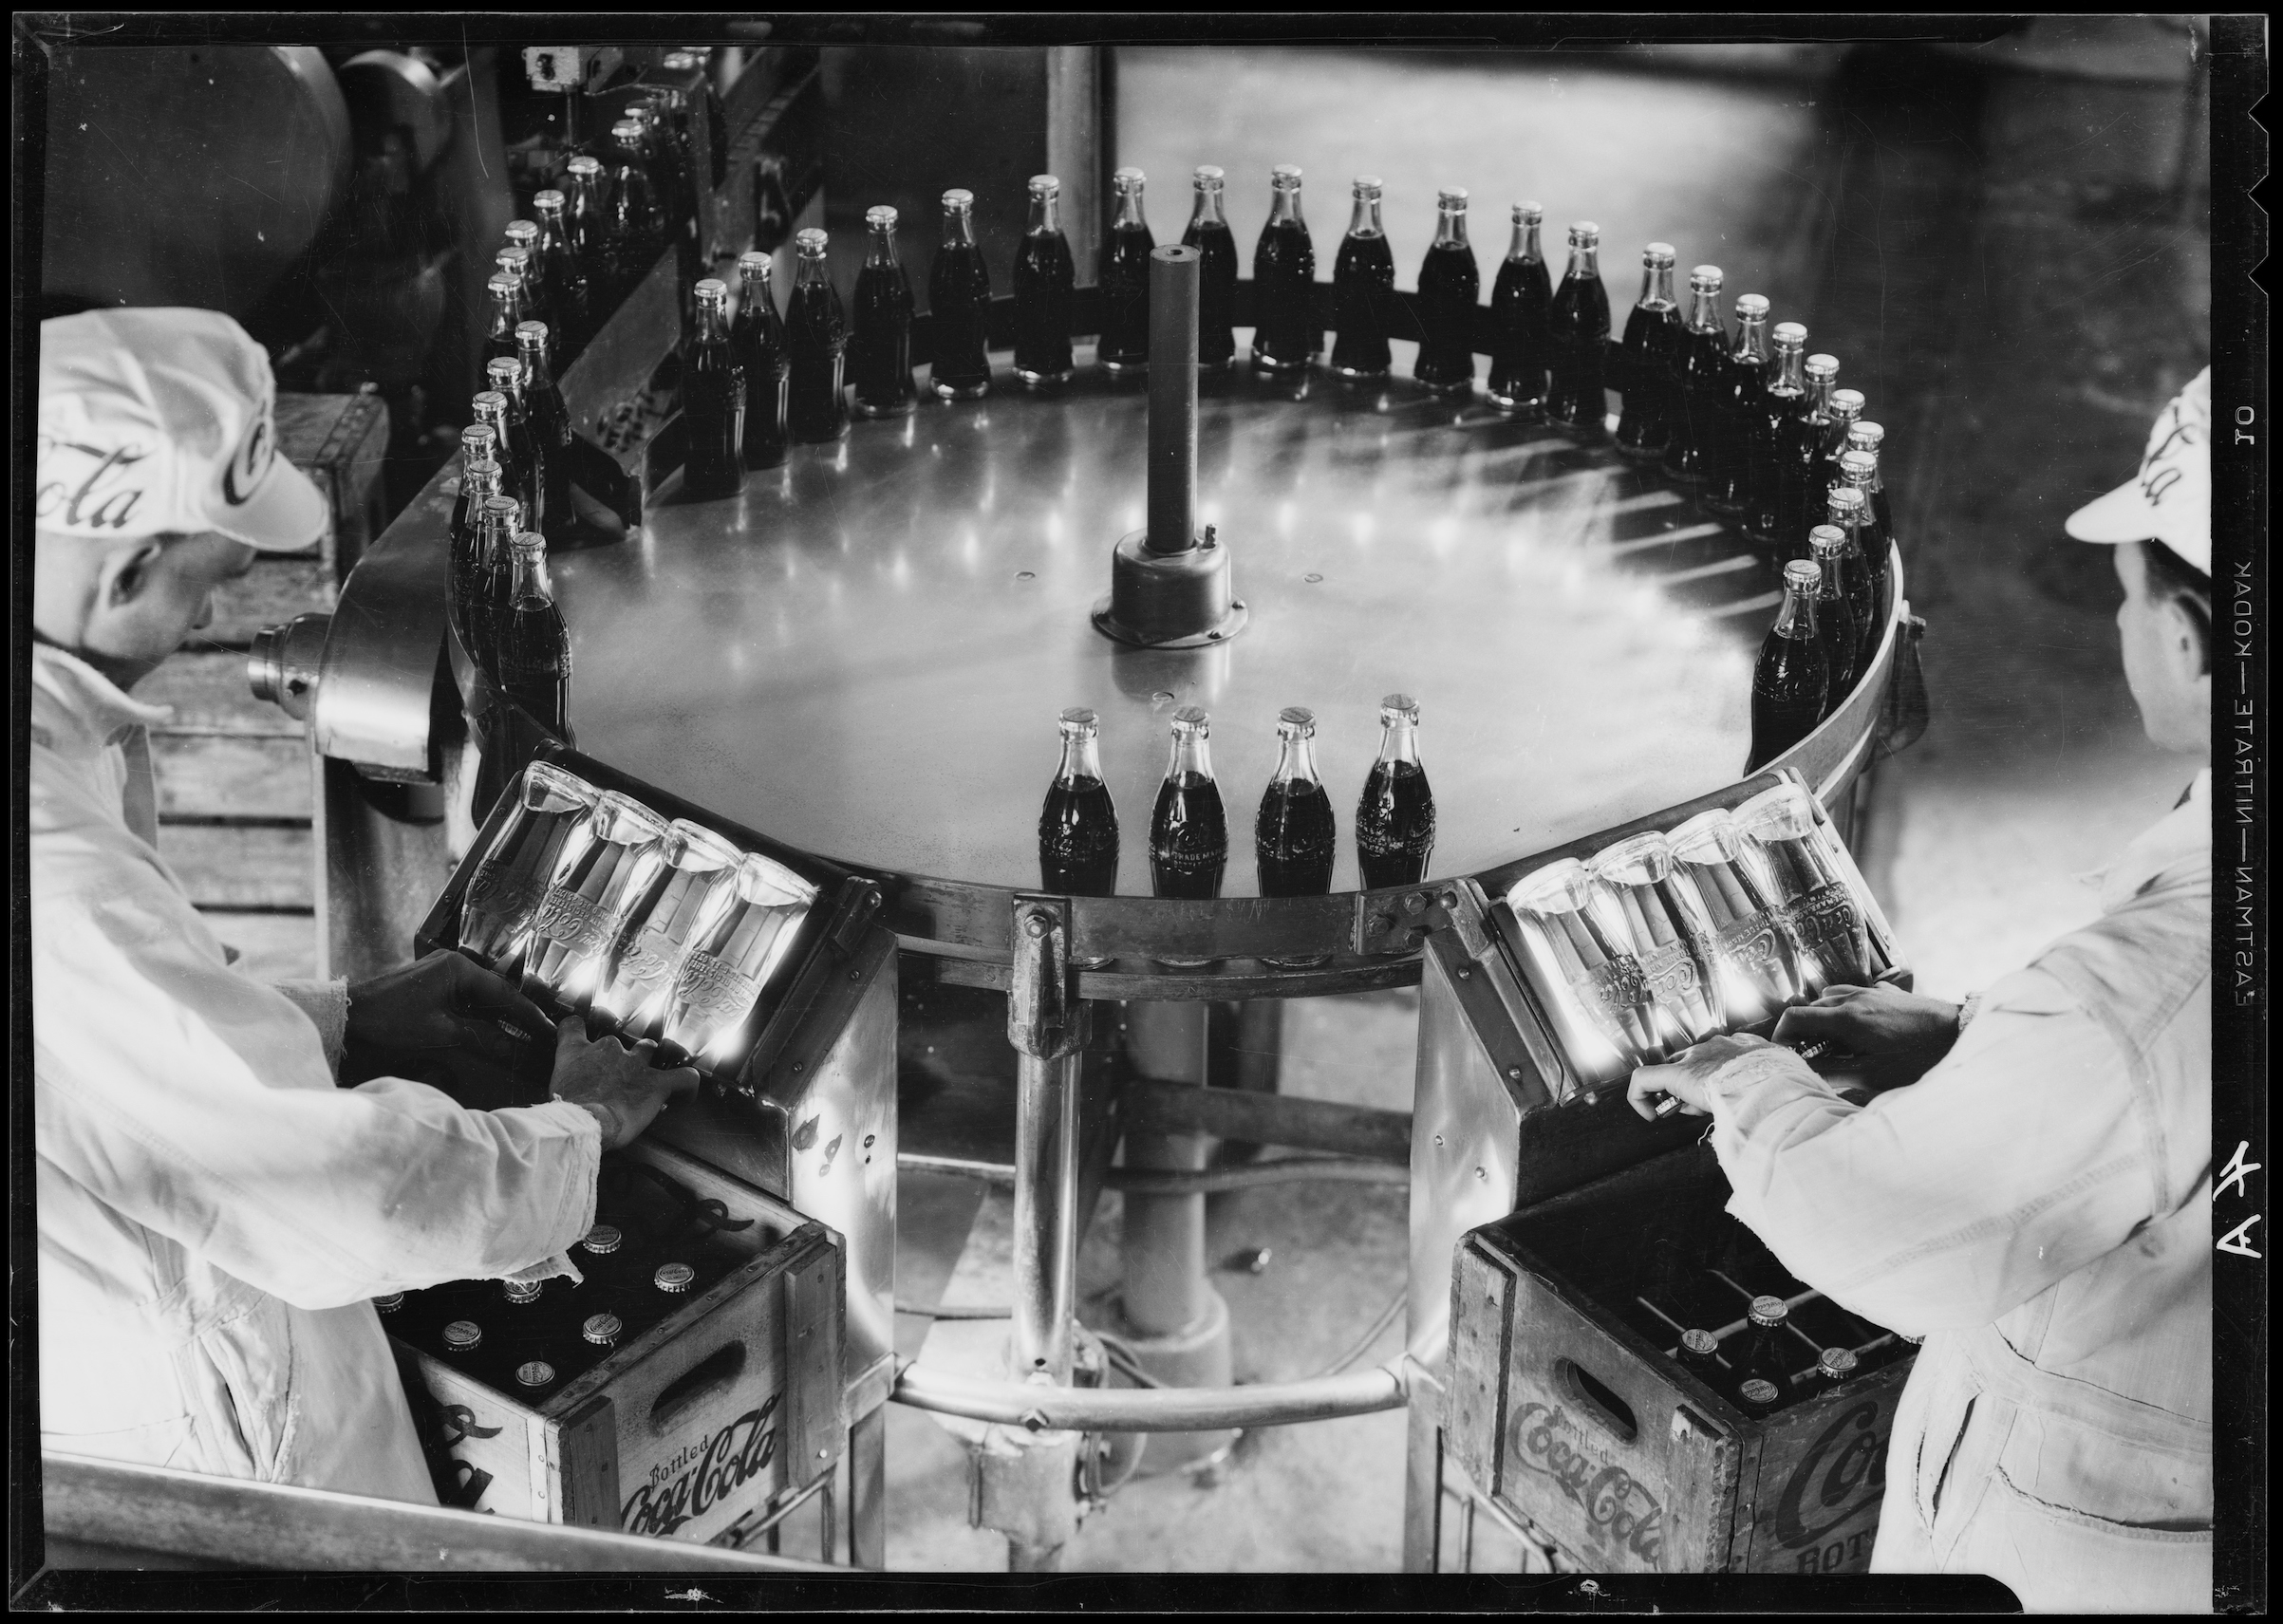 Men inspect bottles on the assembly line at a Coca Cola plant in Los Angeles in the 1930s (University of Southern California/Corbis/Getty Images)